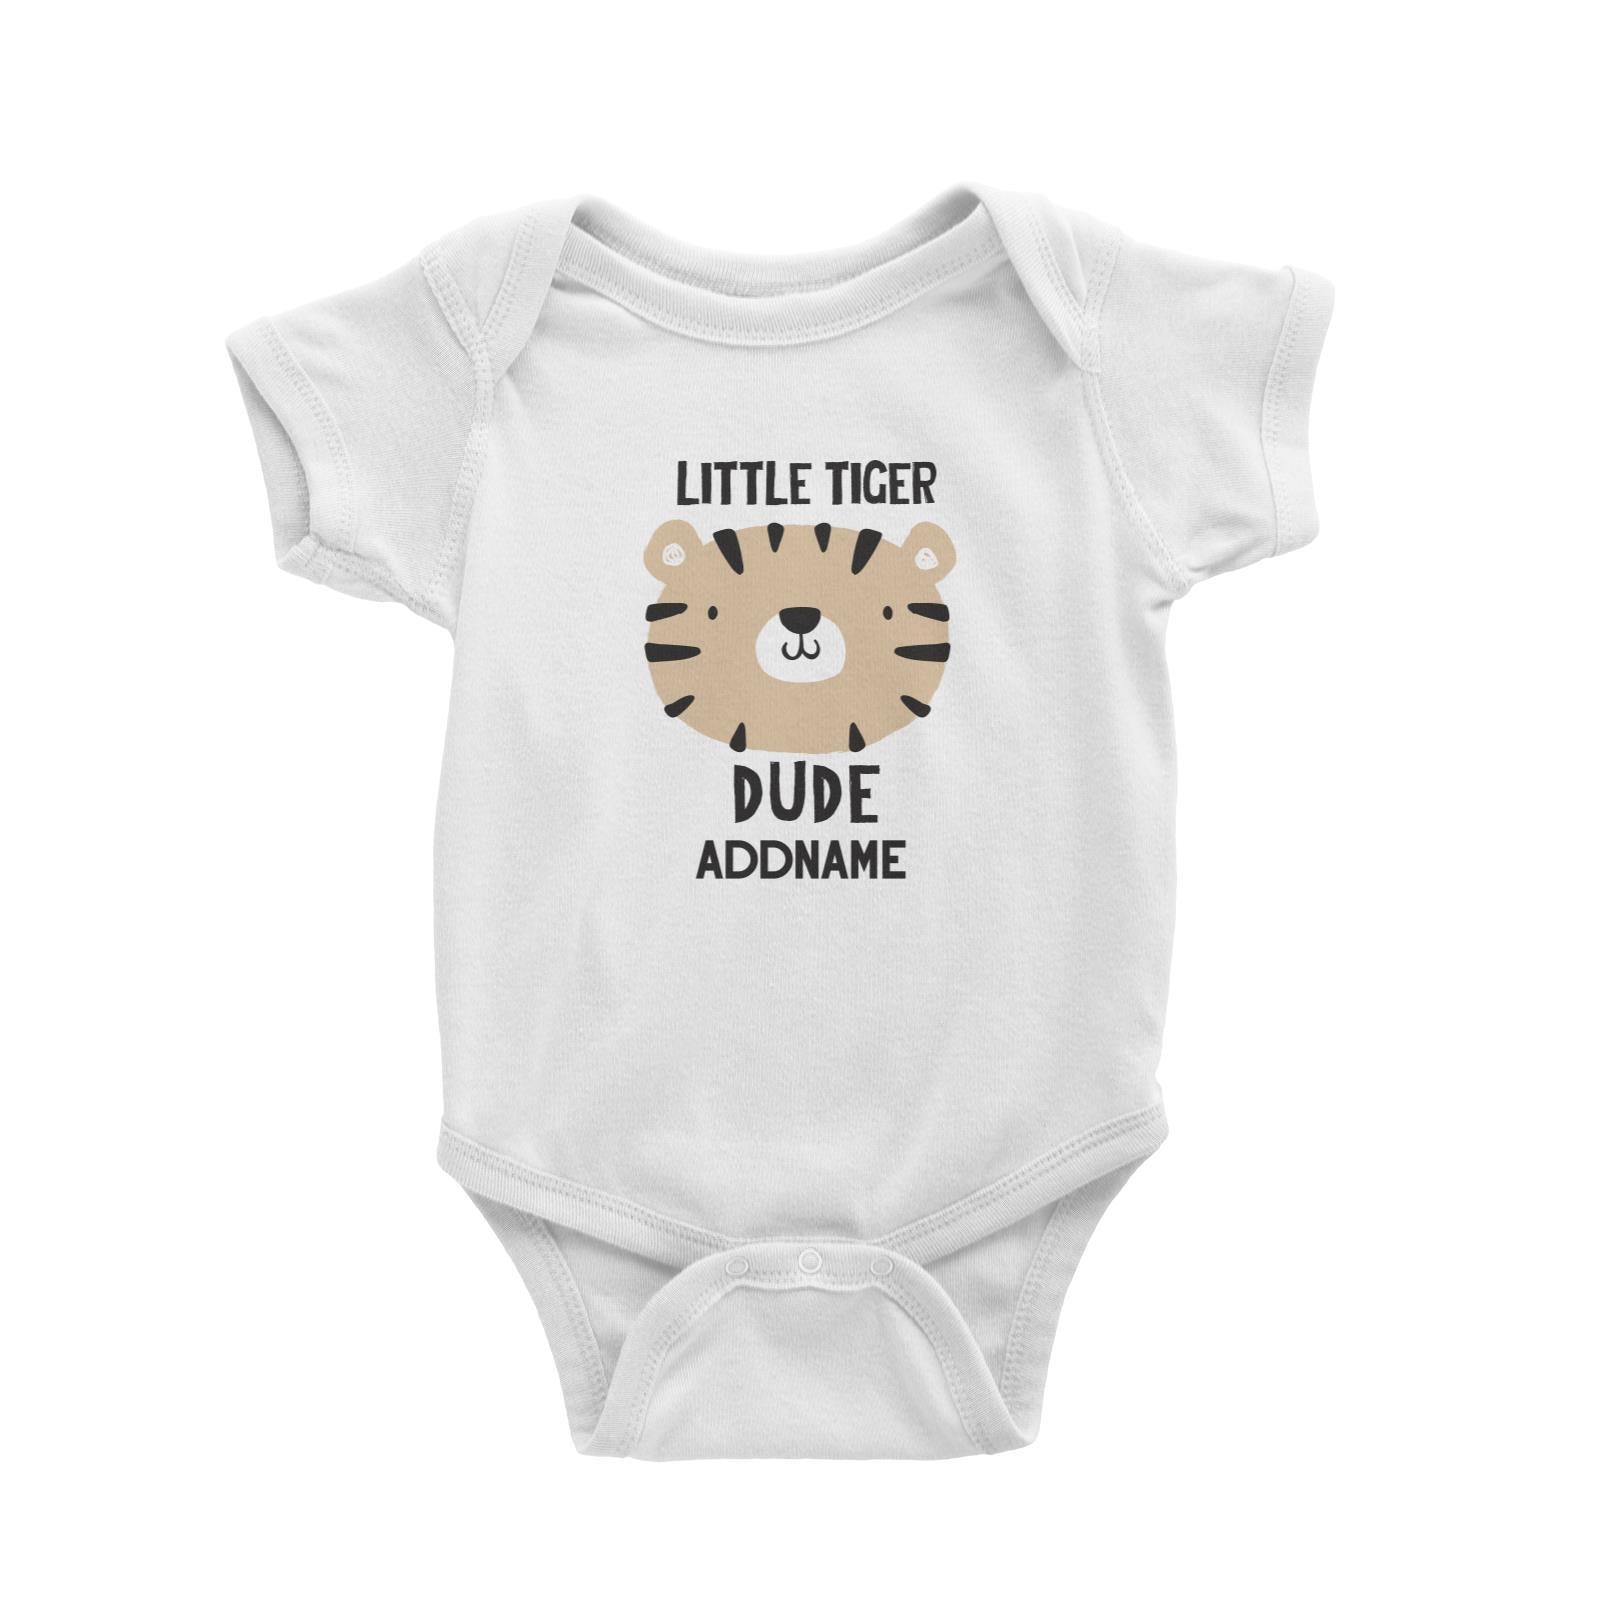 Little Tiger Dude Addname Baby Romper